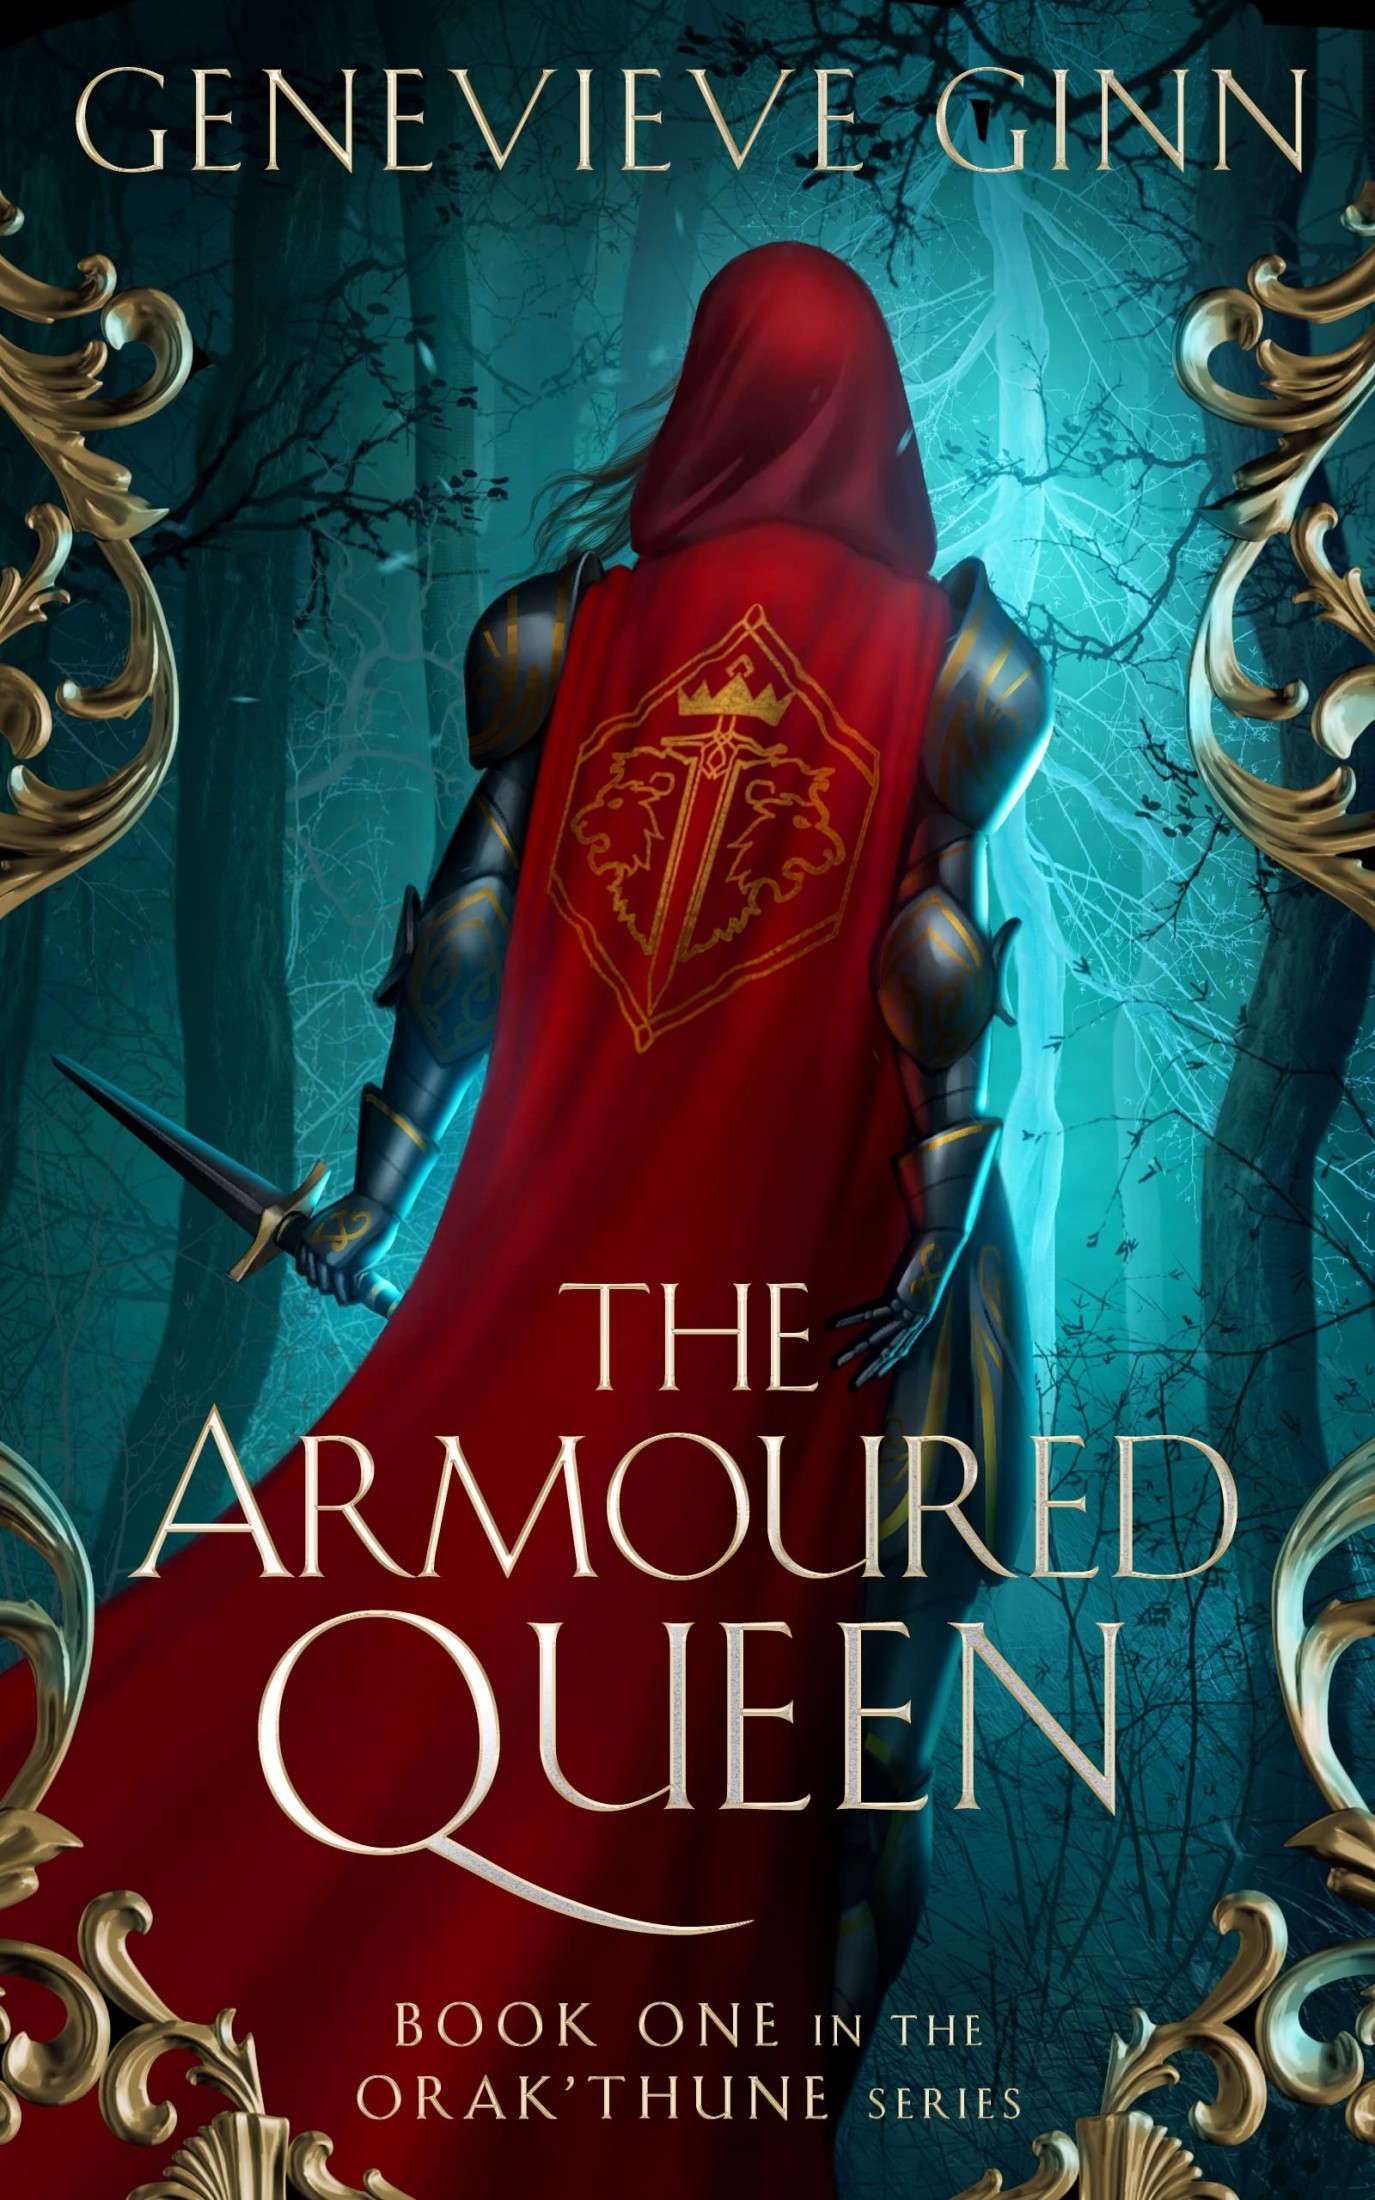 The Armoured Queen